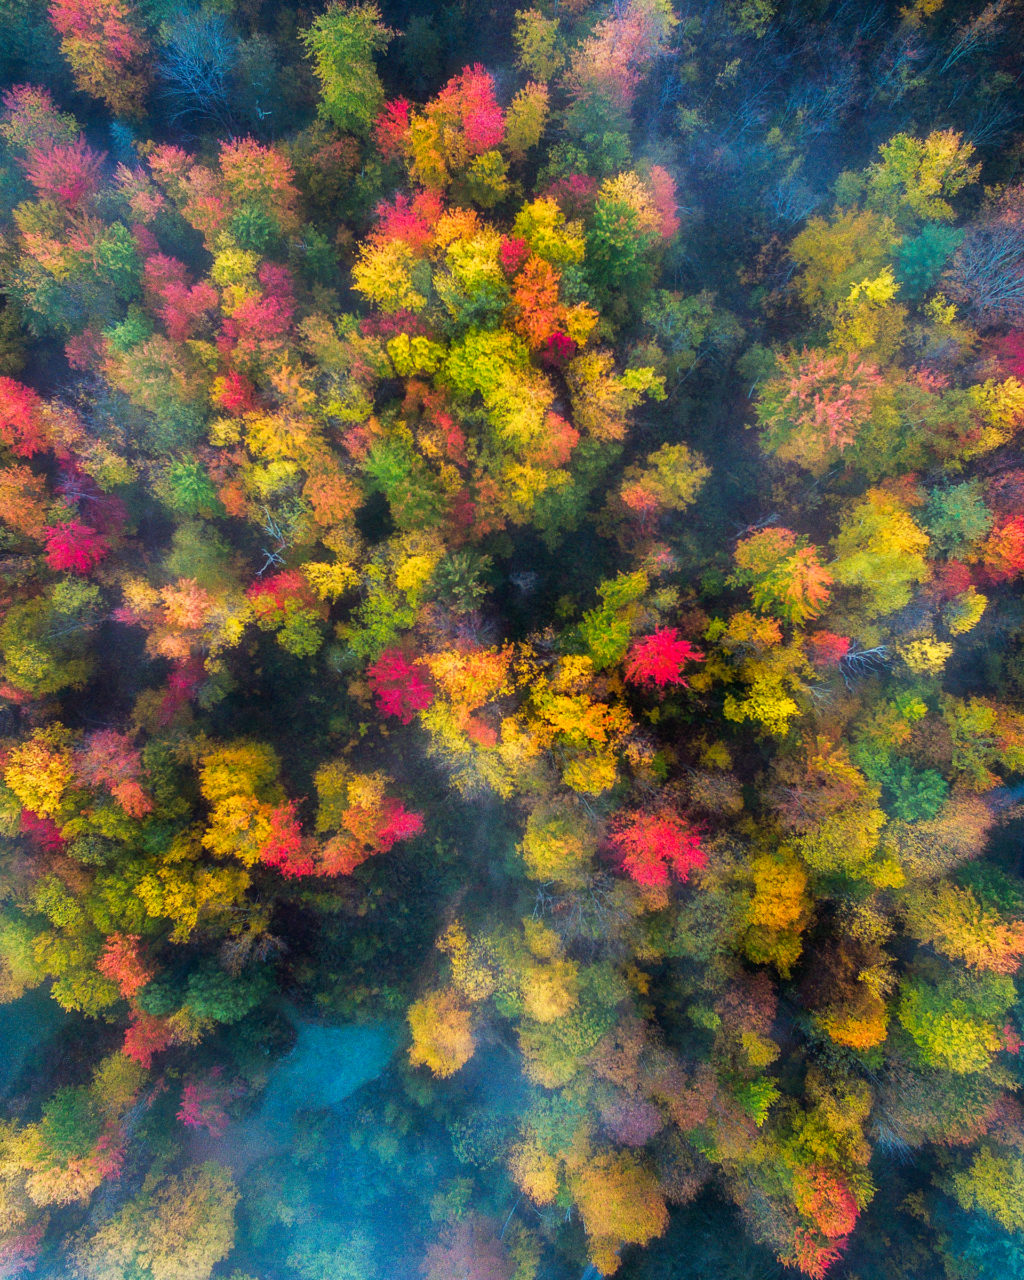 vermont-drone-over-foggy-forests-3-by-michael-matti